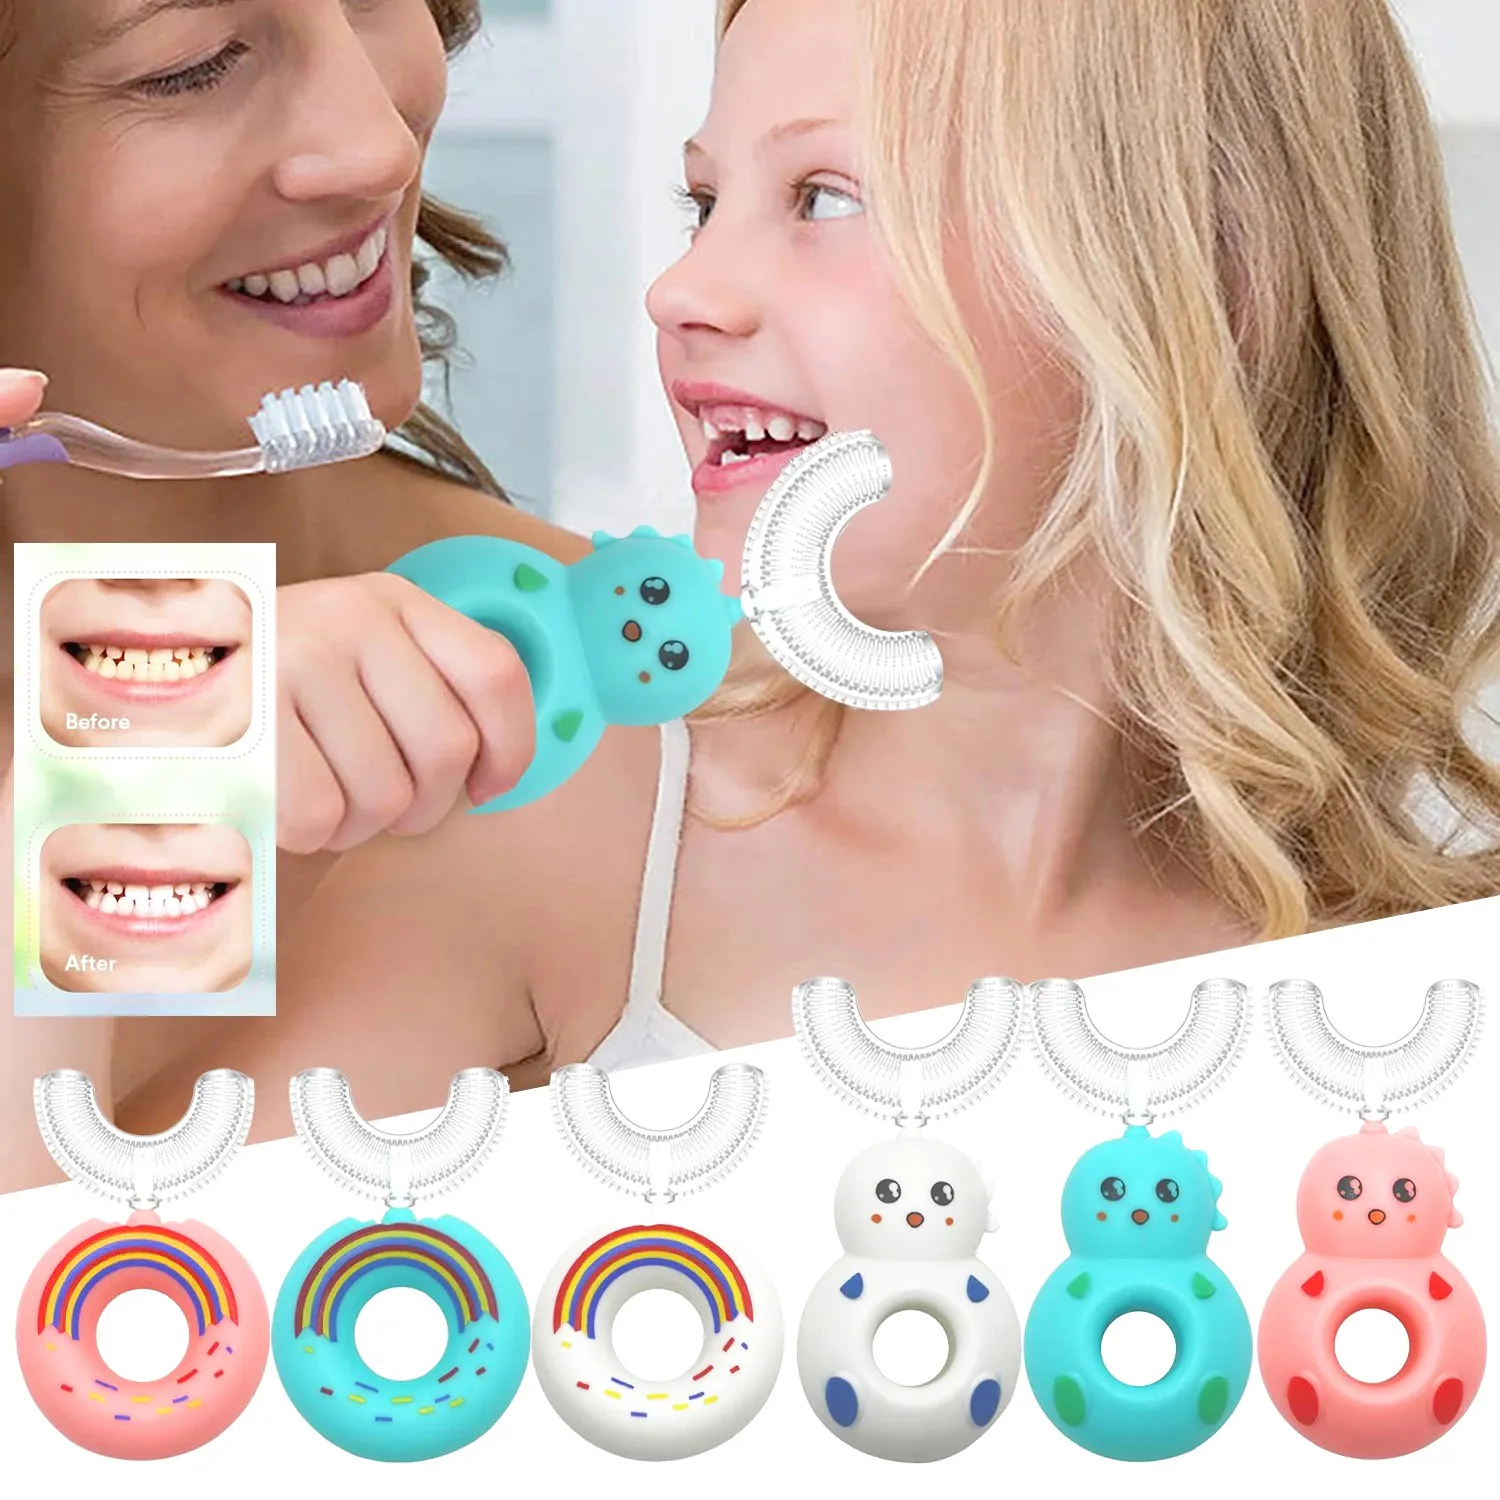 Kids Cartoon Donut Toothbrush With 360Â° U-Shaped Silicone Brush Head Manual Toothbrush Oral Cleaning Kids Training Teeth Cleaning